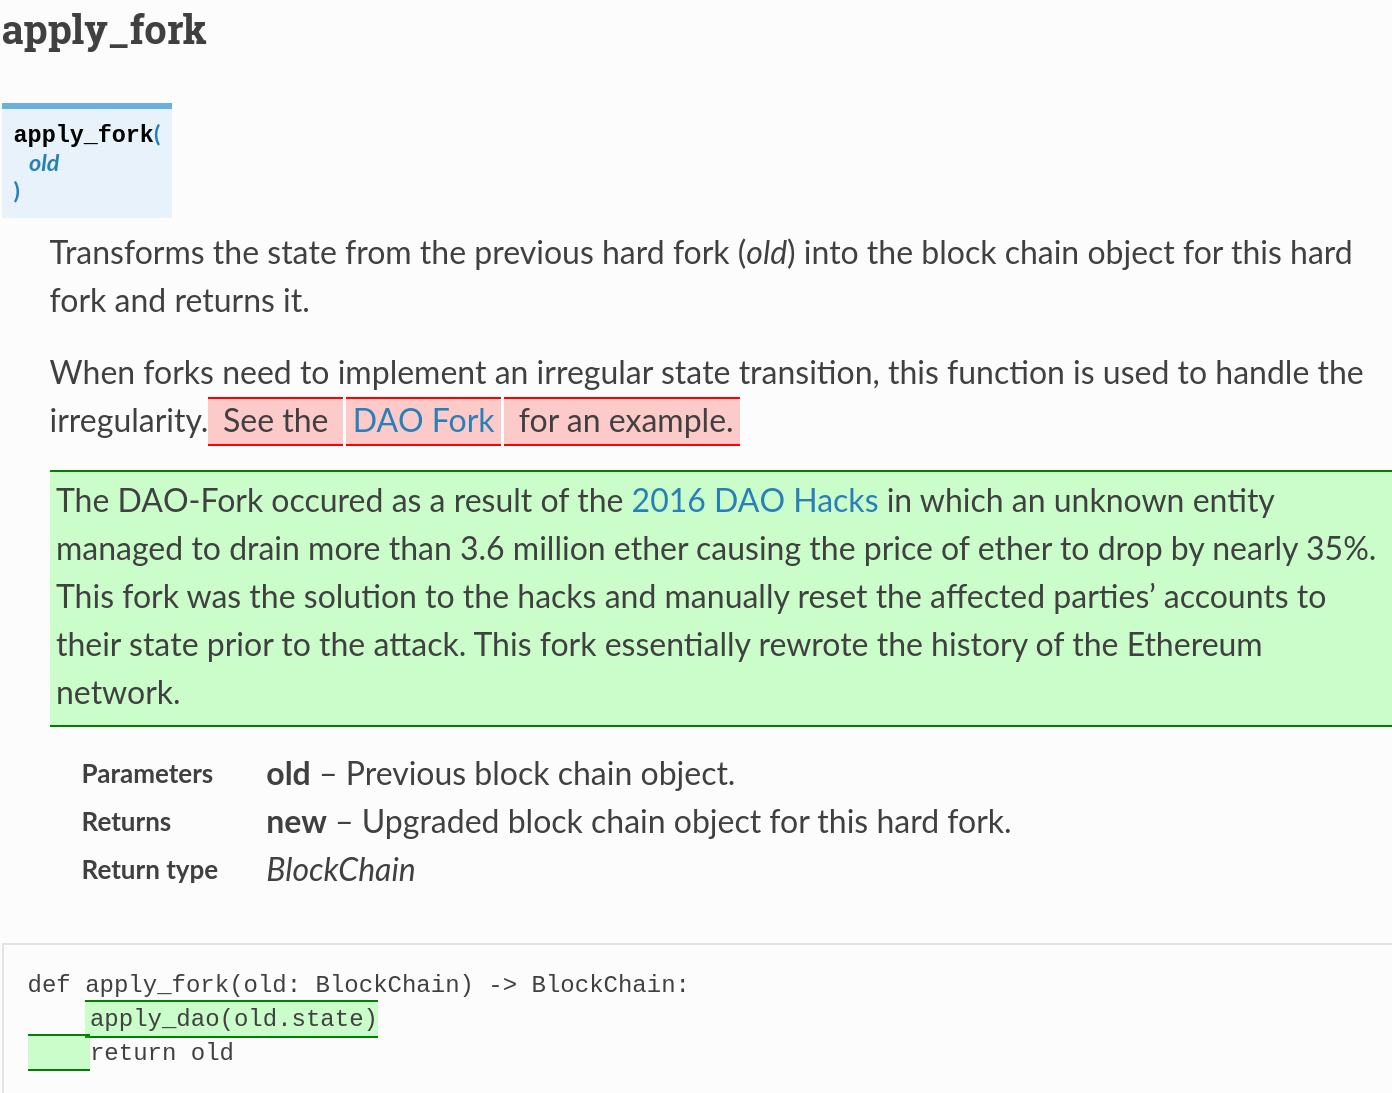 Screenshot of the differences in the apply_fork function between homestead and the DAO fork